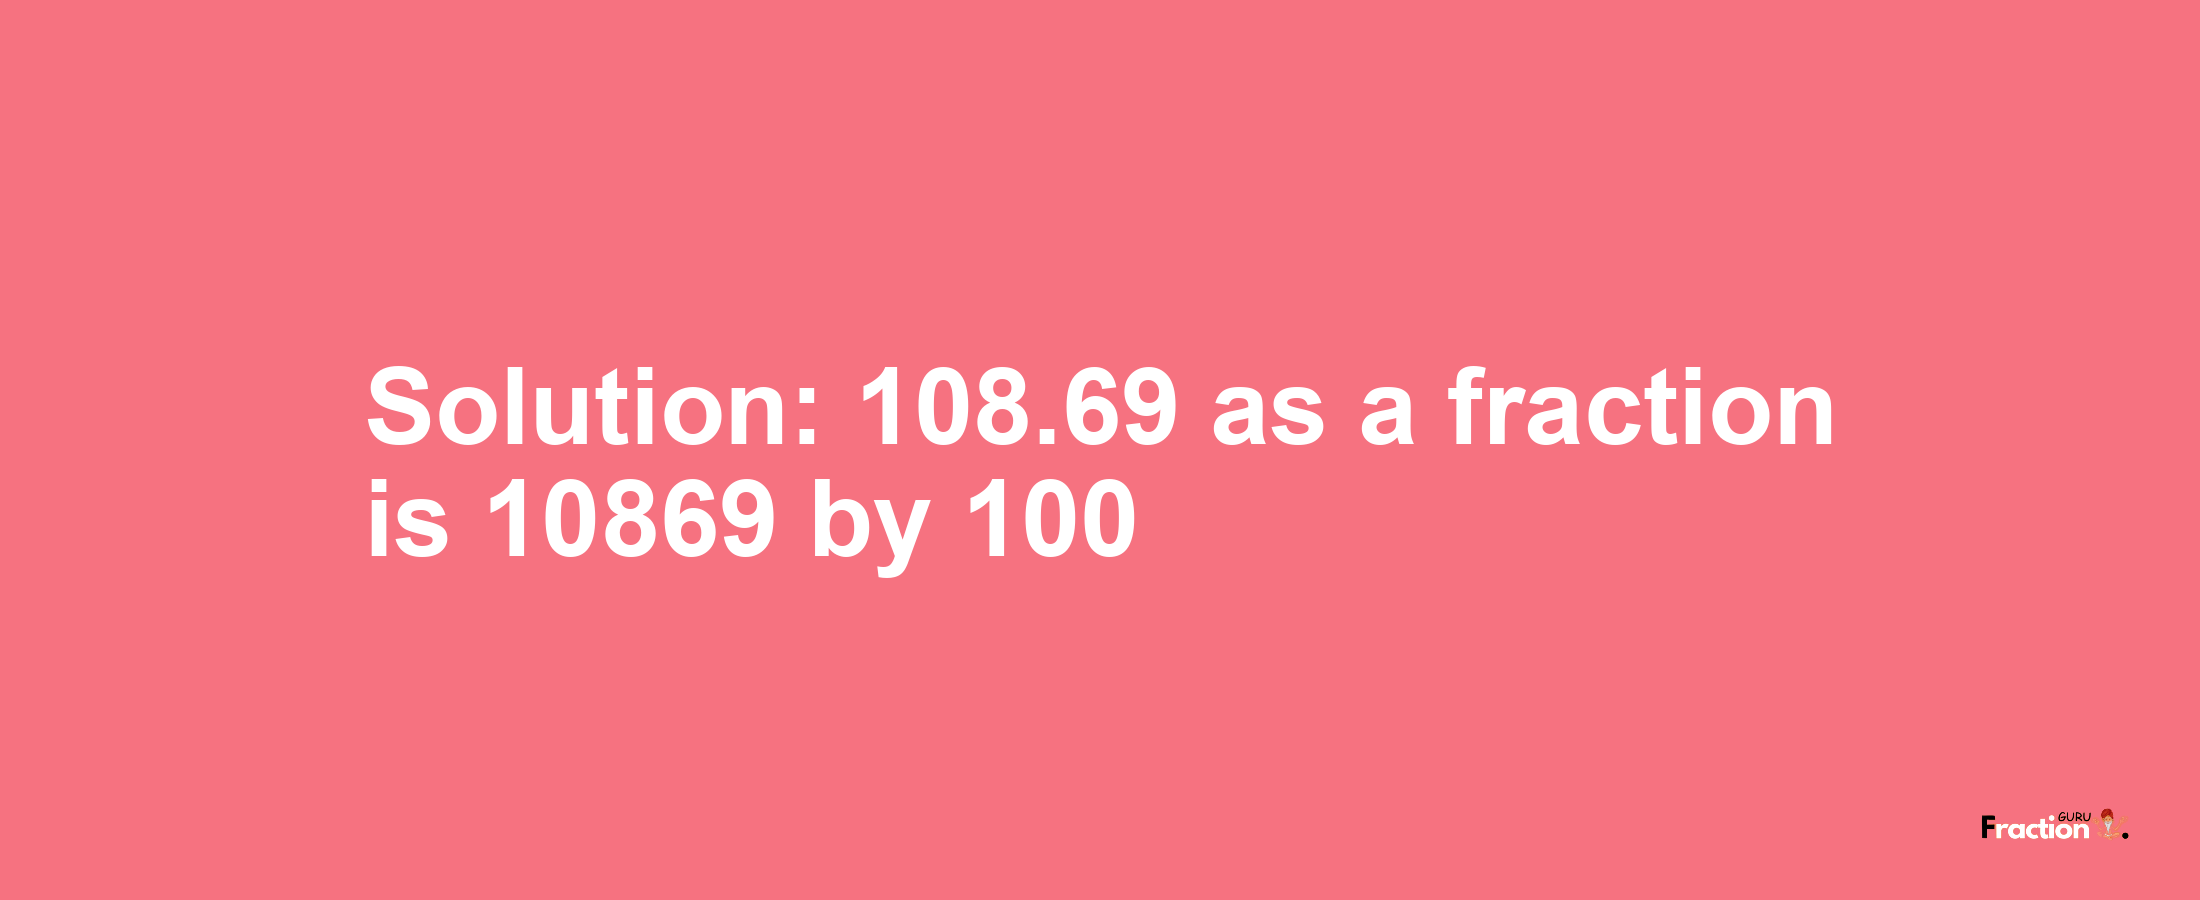 Solution:108.69 as a fraction is 10869/100